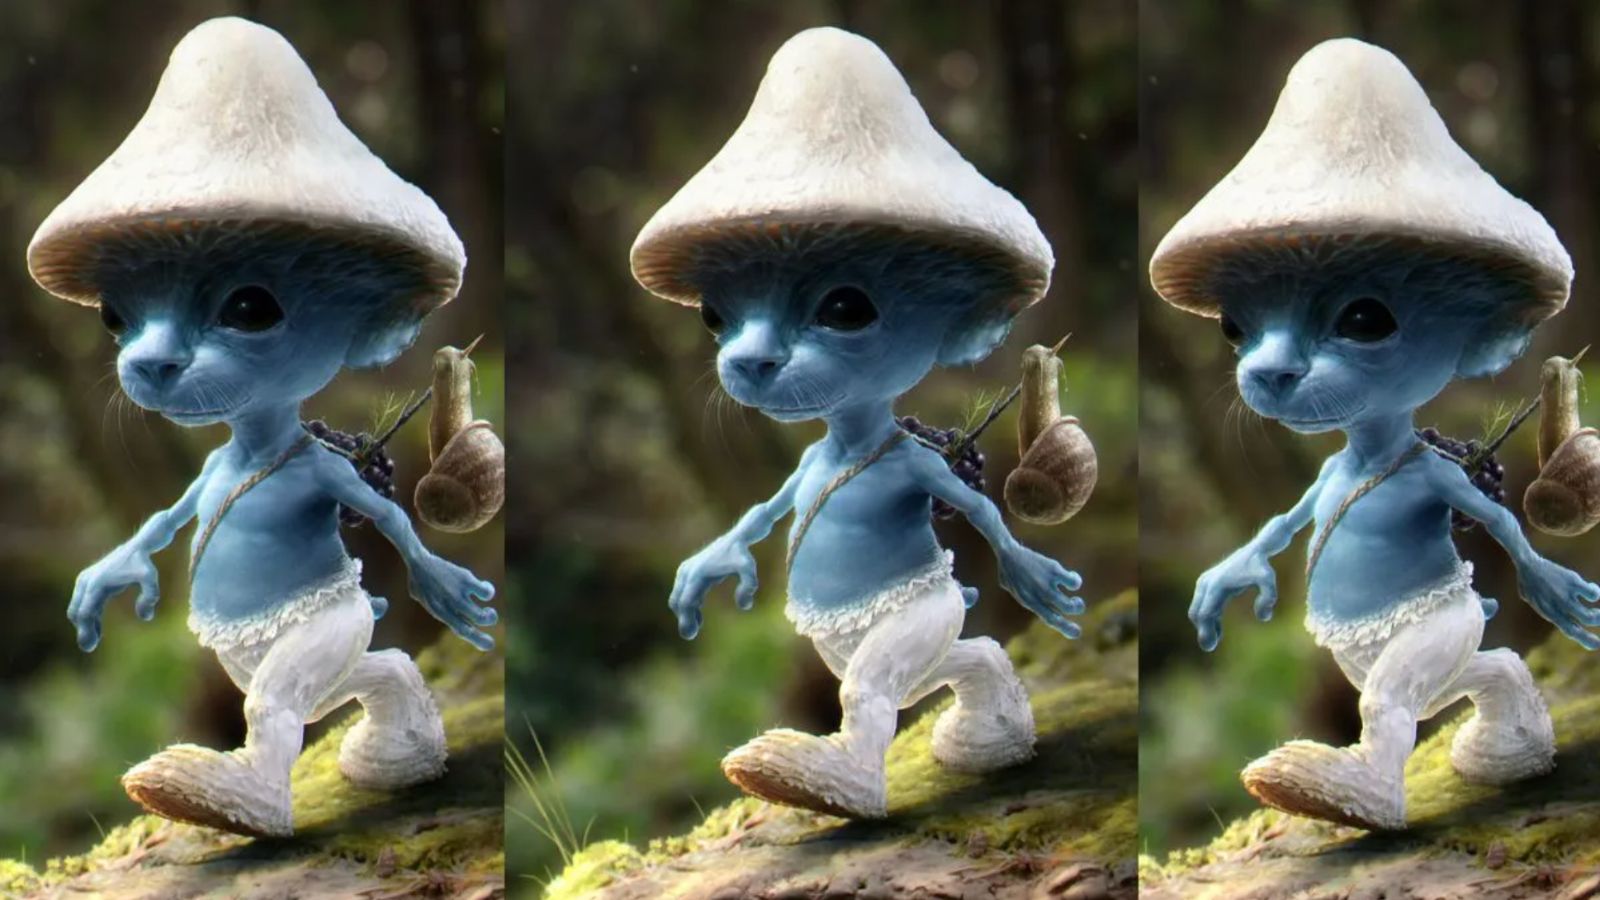 The Unknown Dark History of the Smurfs